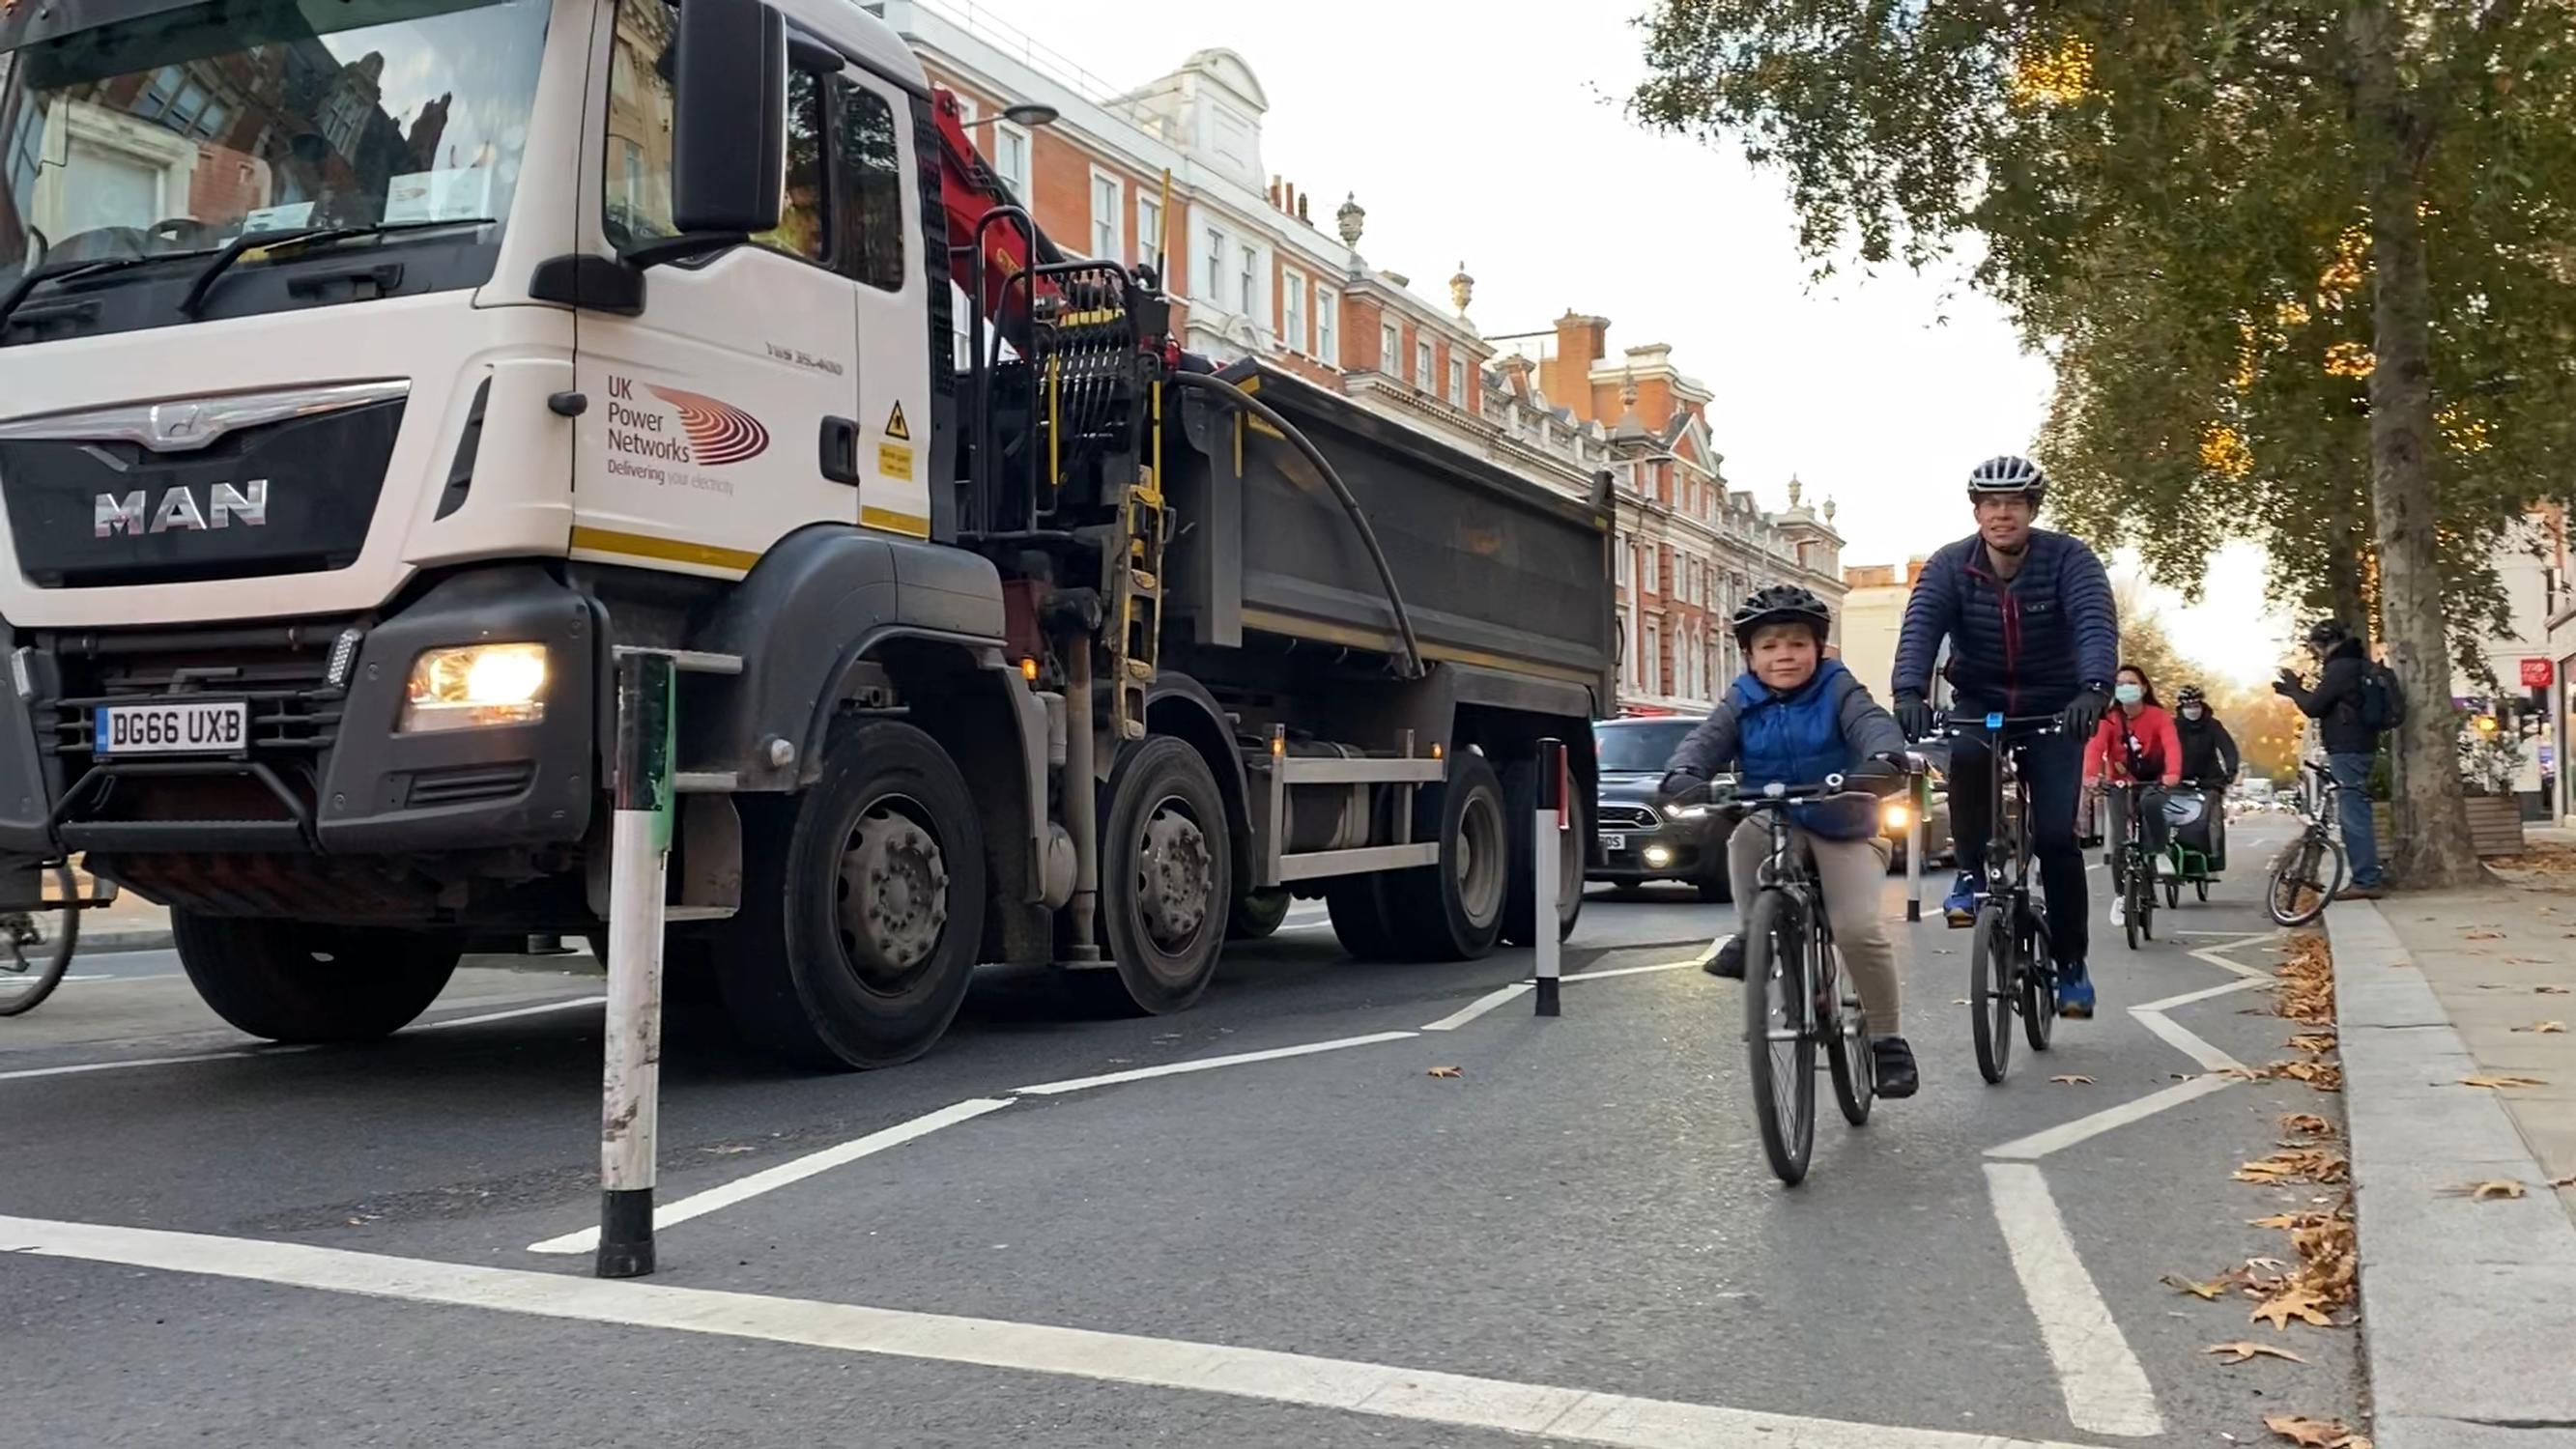 Light segregation measures were removed from Kensington High Street after two months